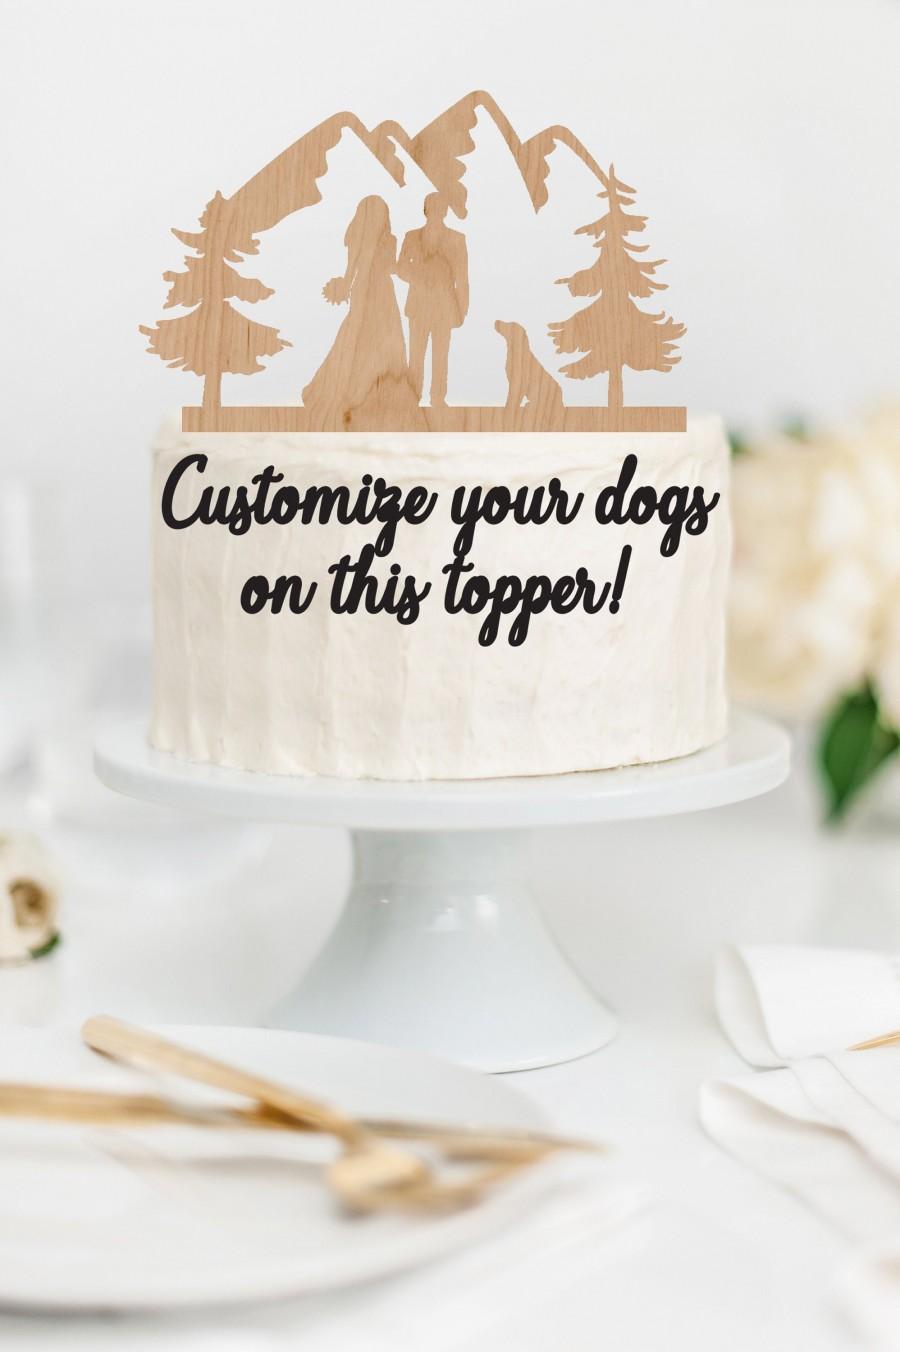 Свадьба - BRIDE GROOM Couple with DOG or Dogs Wood Mountain Wedding Cake Topper / Mountain outdoor bride groom cake topper / Wedding cake topper